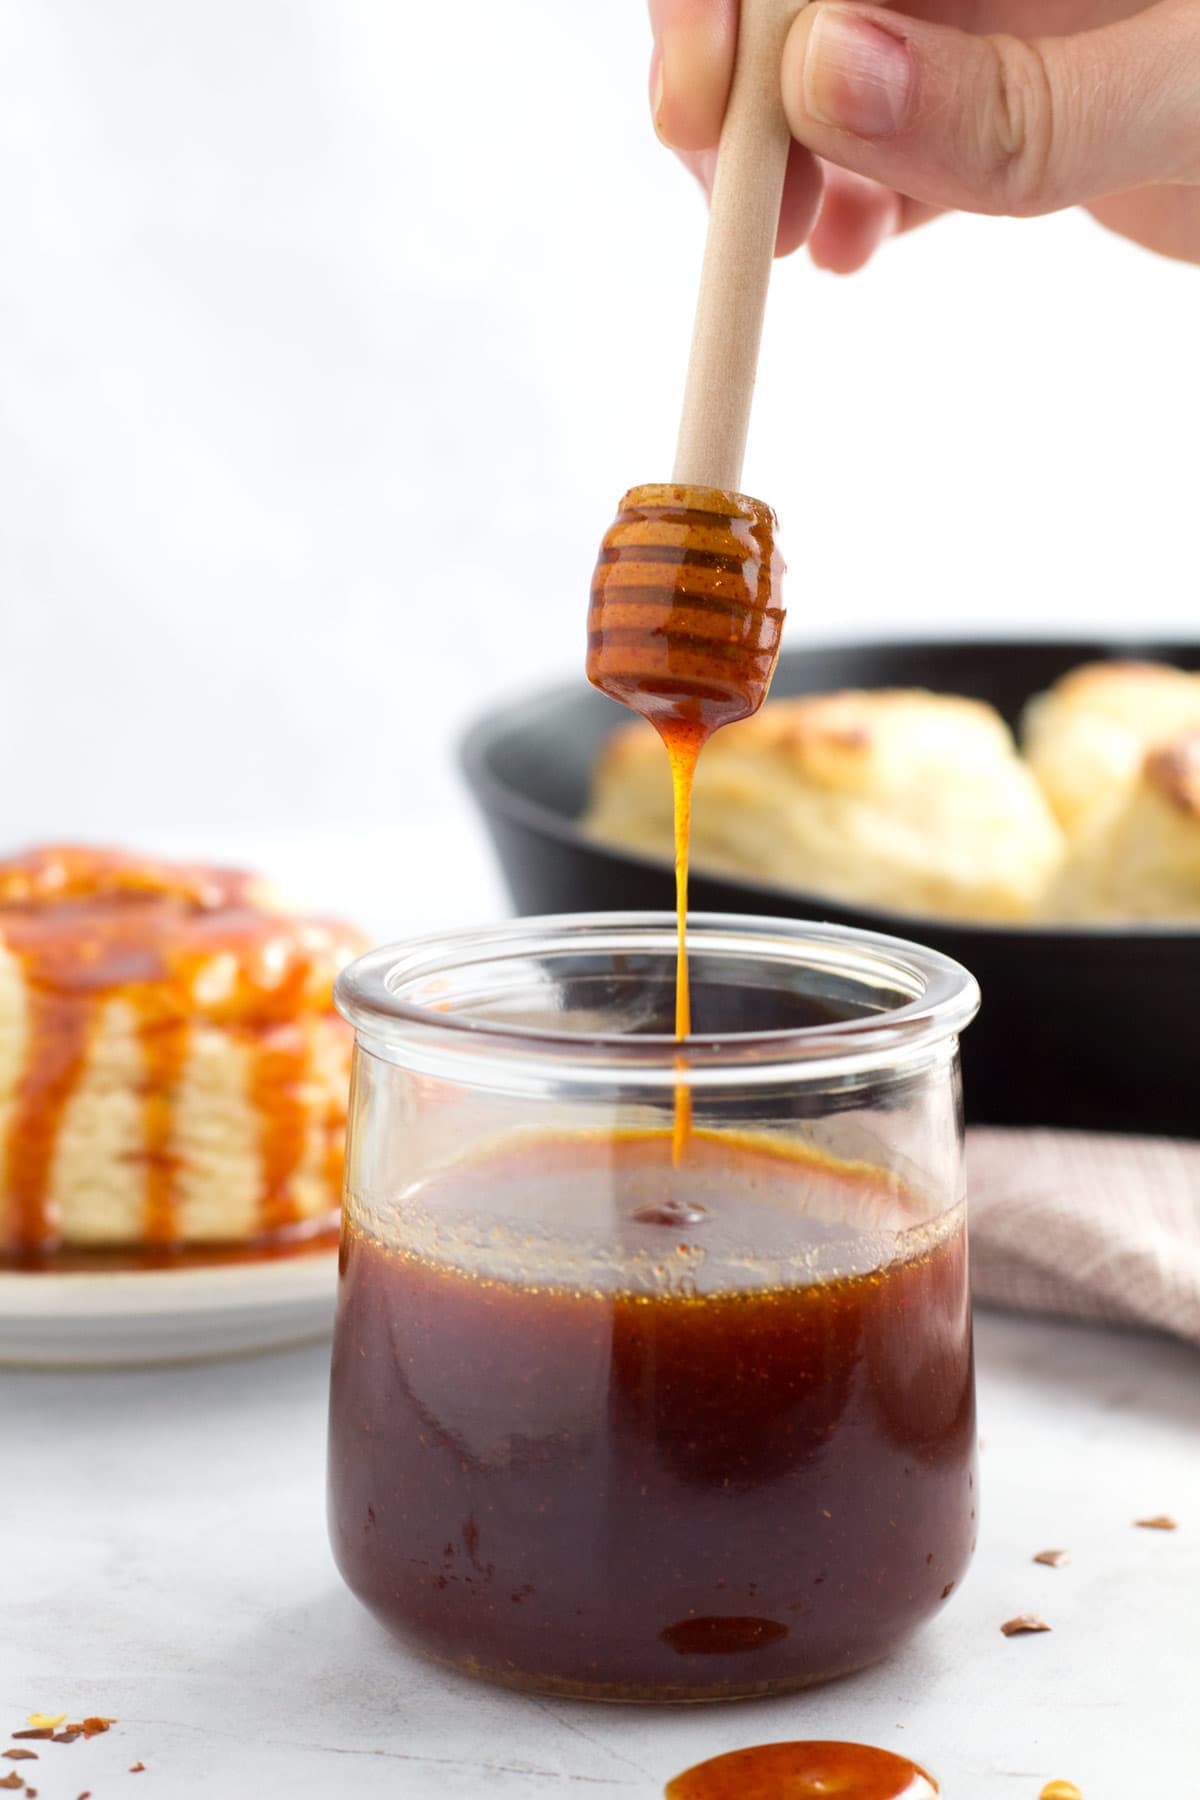 Hot Honey Recipe (easy to make!) - The Endless Meal®